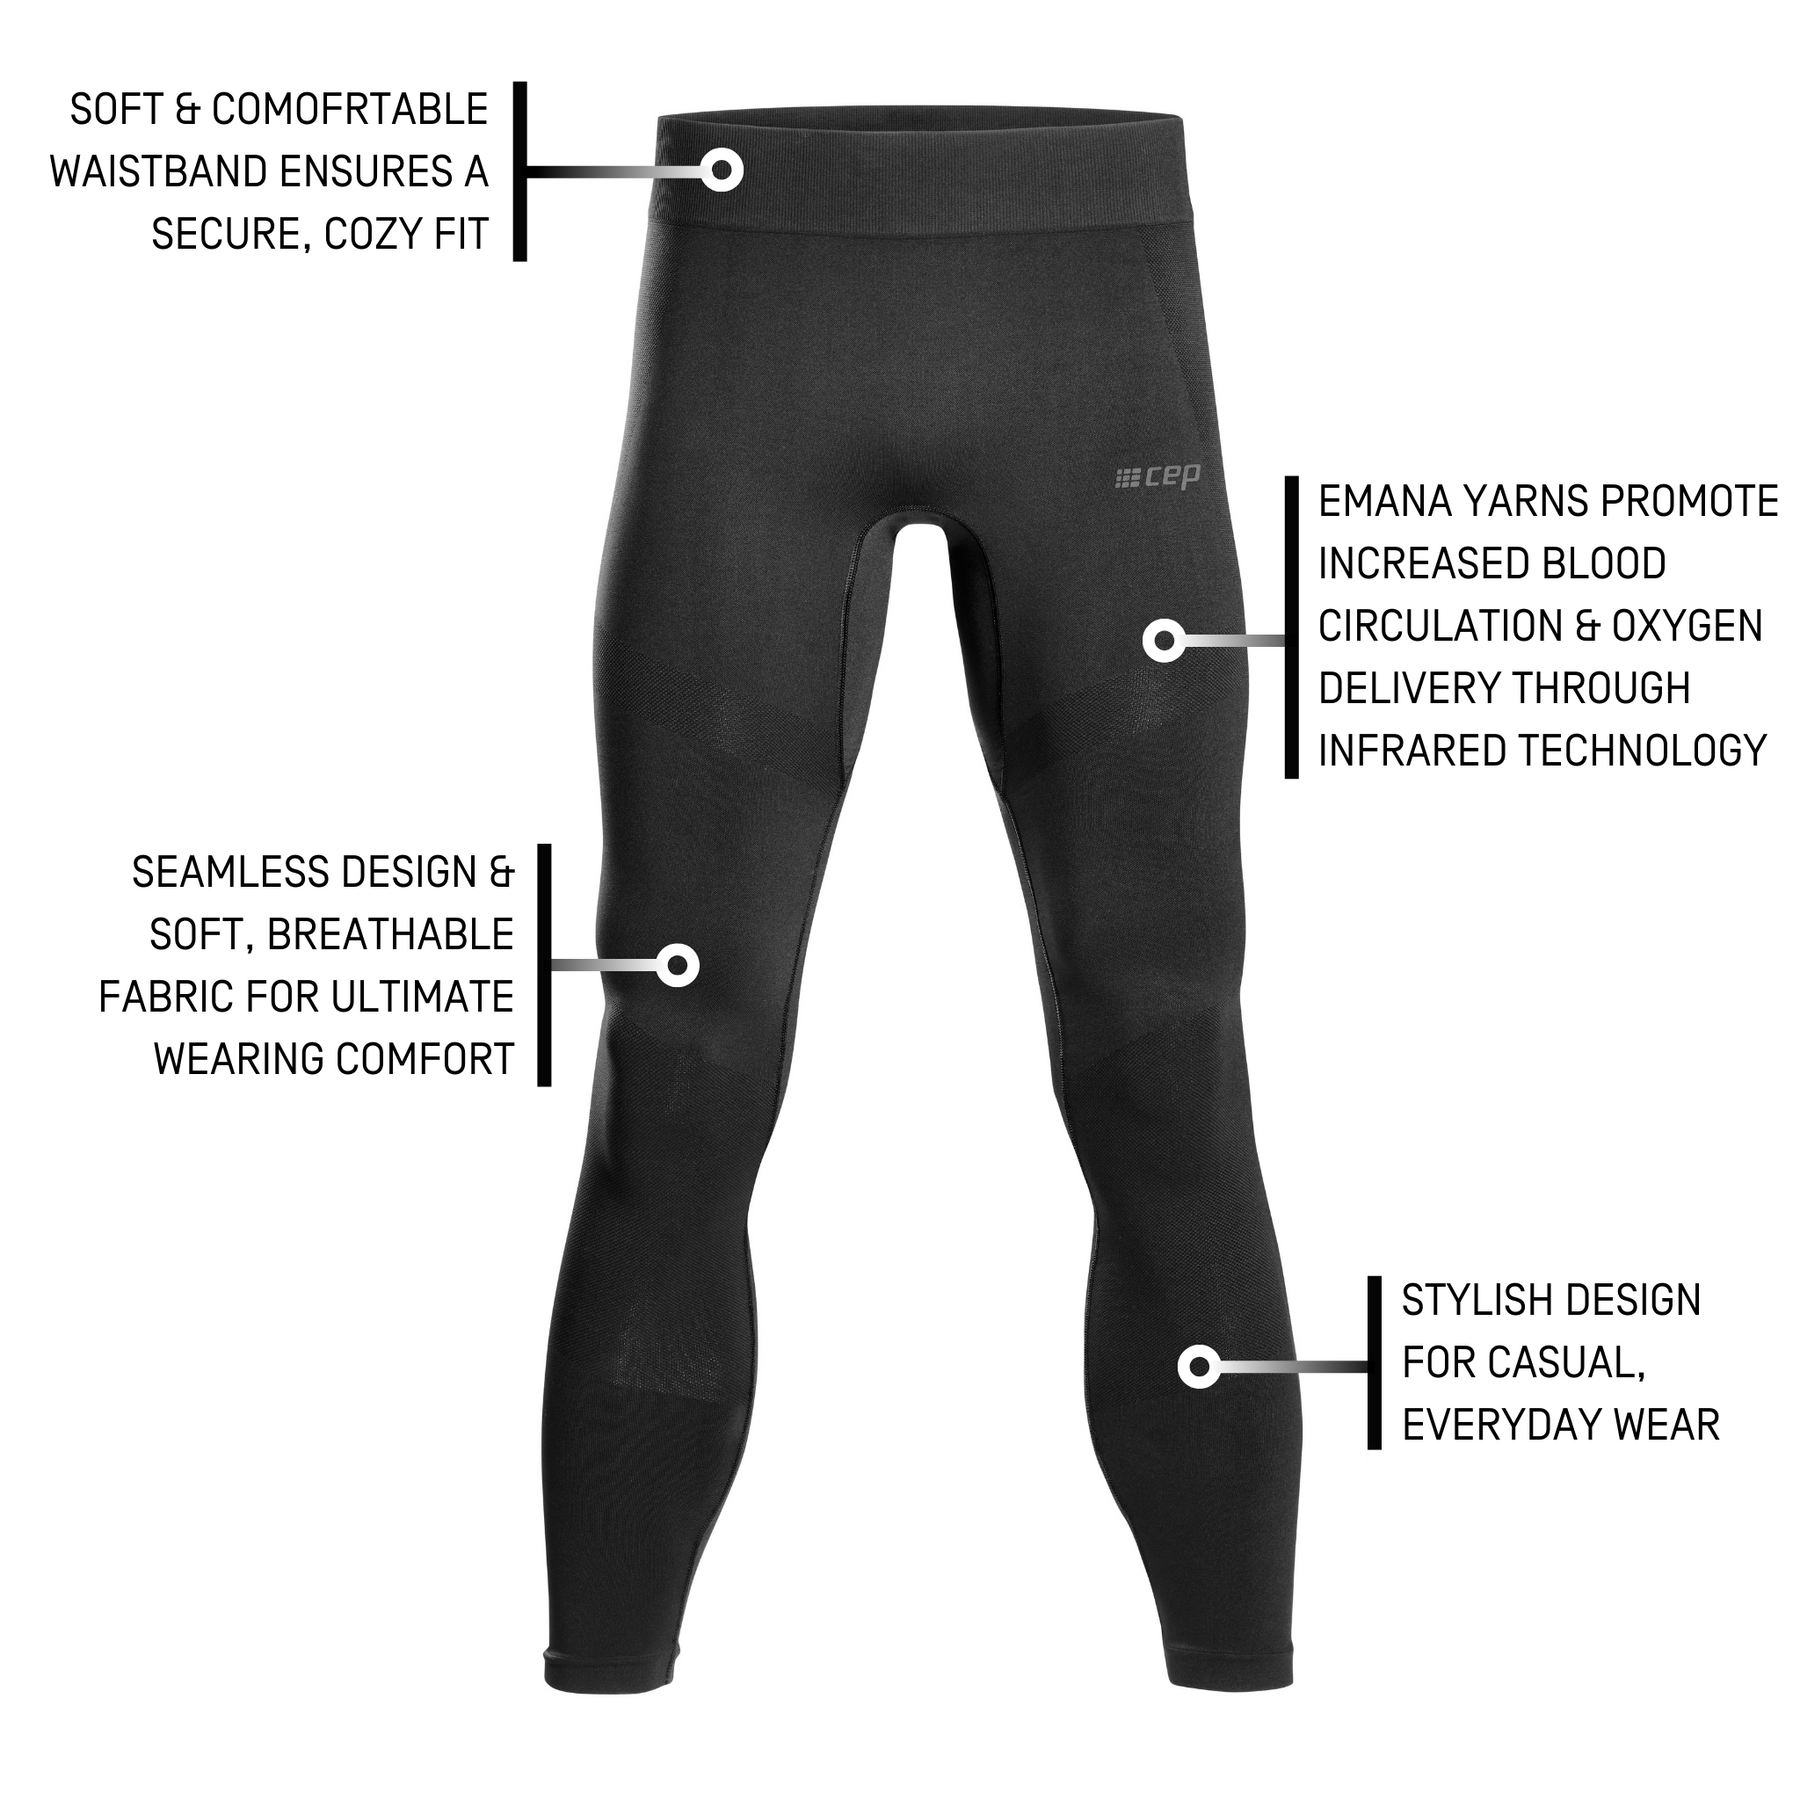 Athletic Compression Tights, BUY Recovery Pro Tights, CEP Recovery Tights,  Running Tights, Running Compression Socks, Compression Stockings, WH4P5R2,  WH4P5R3, WH4P5R4, WH5P5R2, WH5P5R3, WH5P5R4